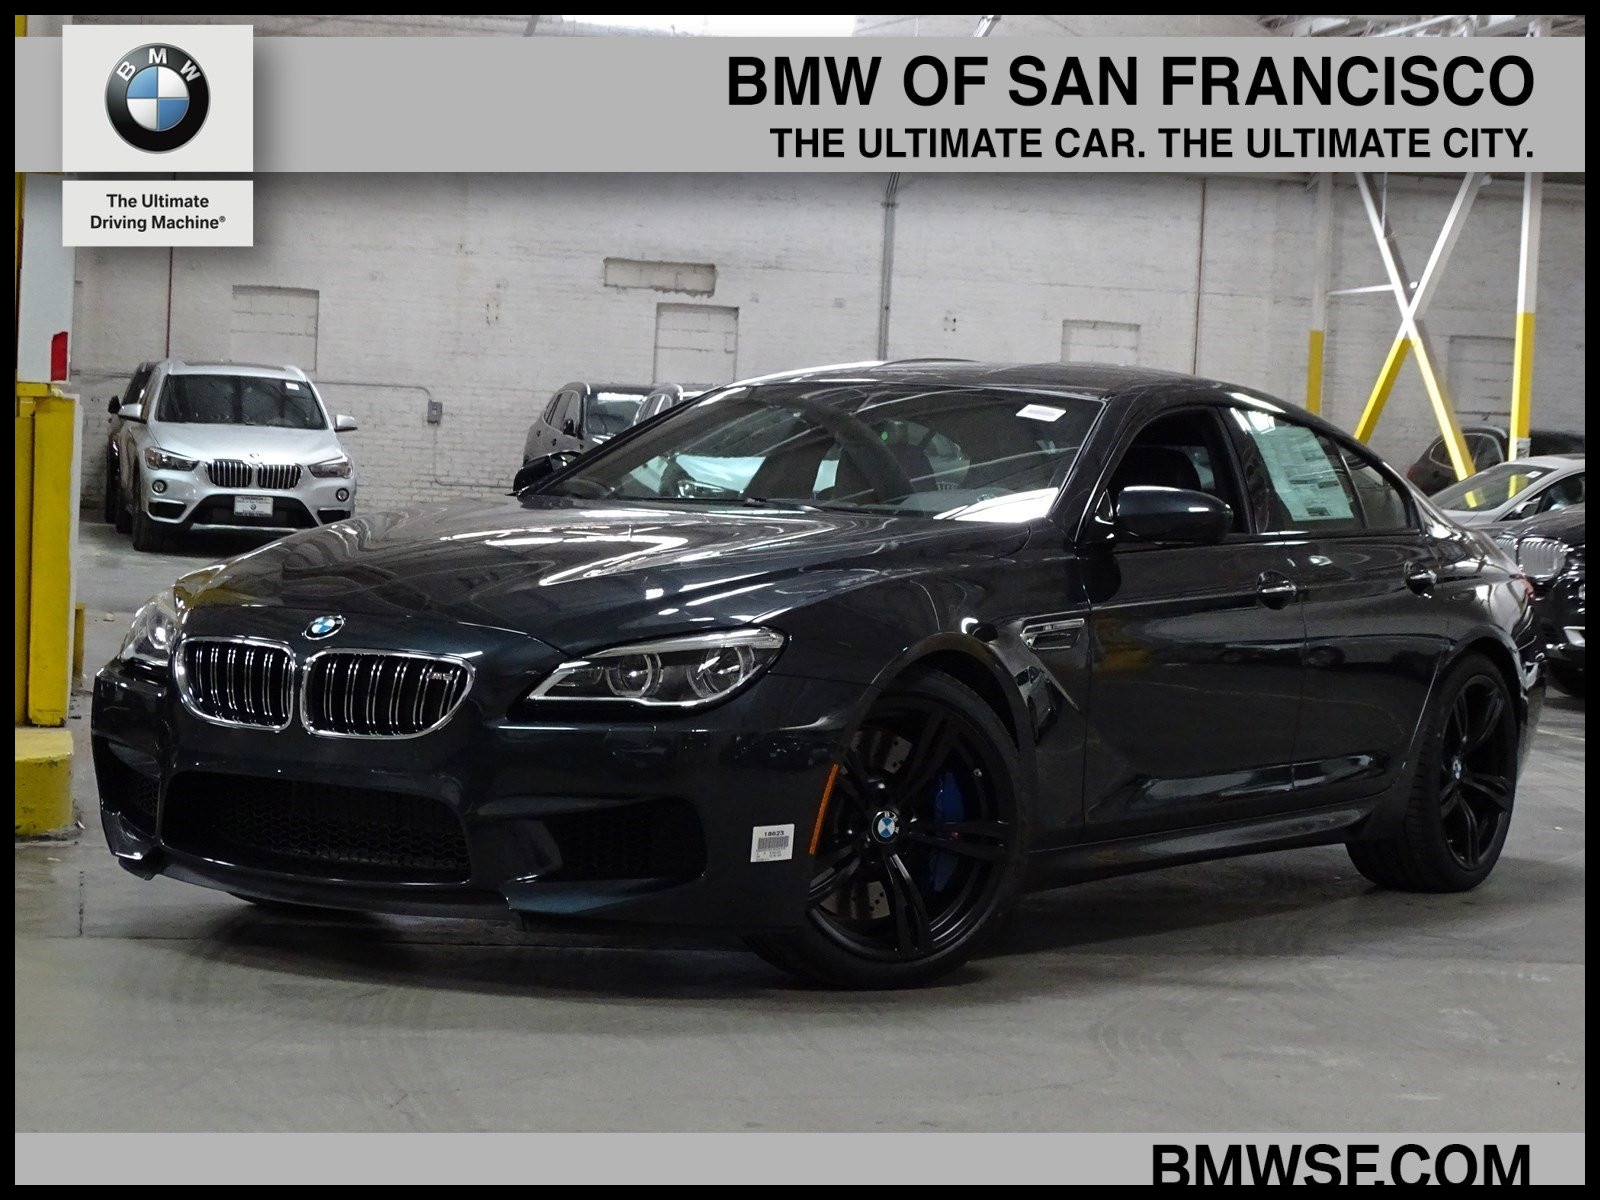 2018 Bmw M6 Review Best New 2018 Bmw M6 Base 4dr Car In San Francisco